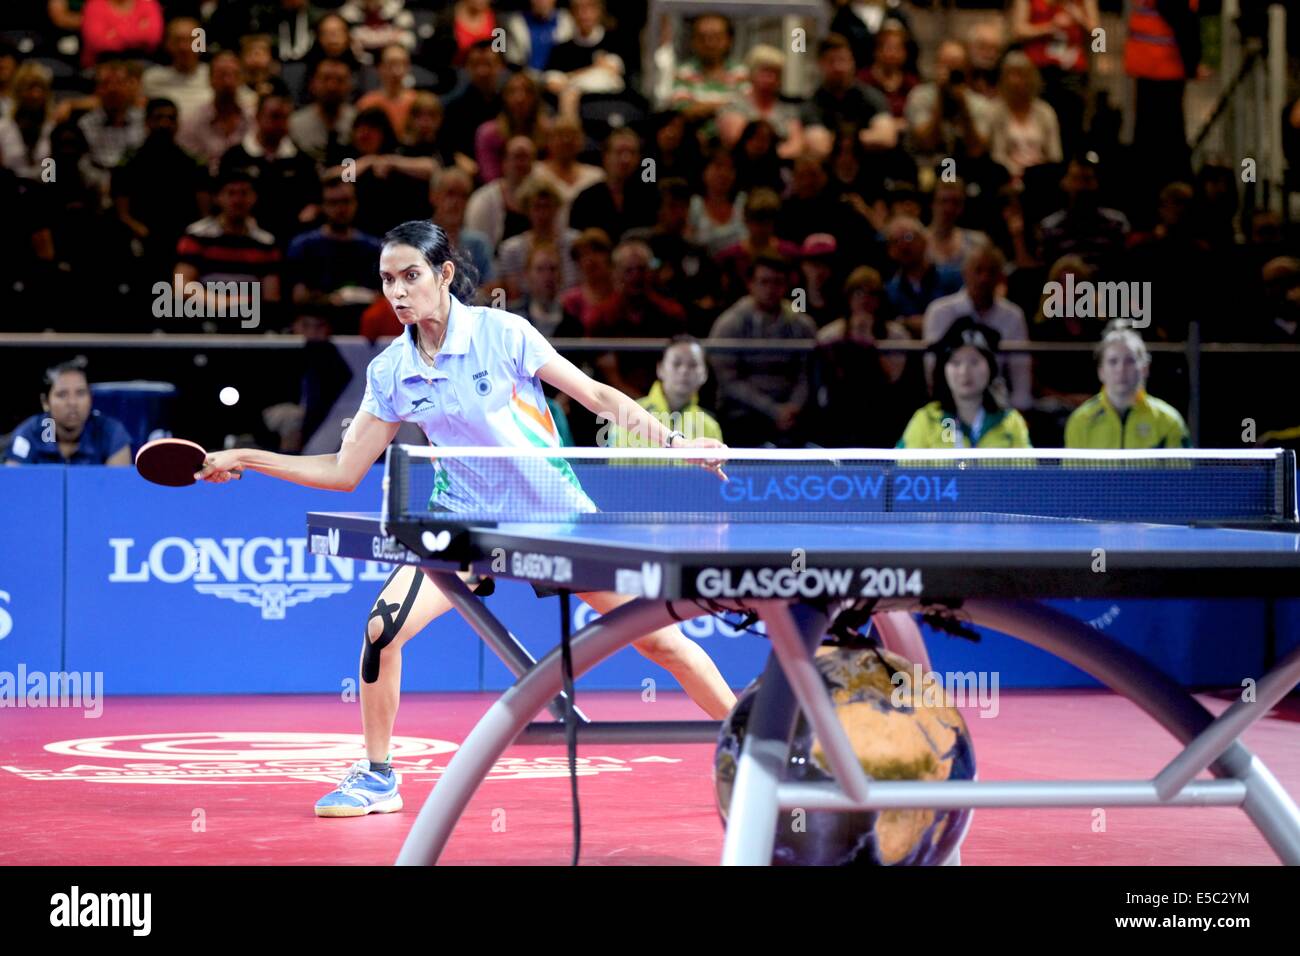 Glasgow, UK. 27th July, 2014. Commonwealth Games day 4. Table Tennis women’s team bronze medal match.  Australia win 3-1 against India to win the bronze medal. Pictured here is S. Kumaresan of India against Ziyu Zhang in the first singles match in the team event Credit:  Neville Styles/Alamy Live News Stock Photo